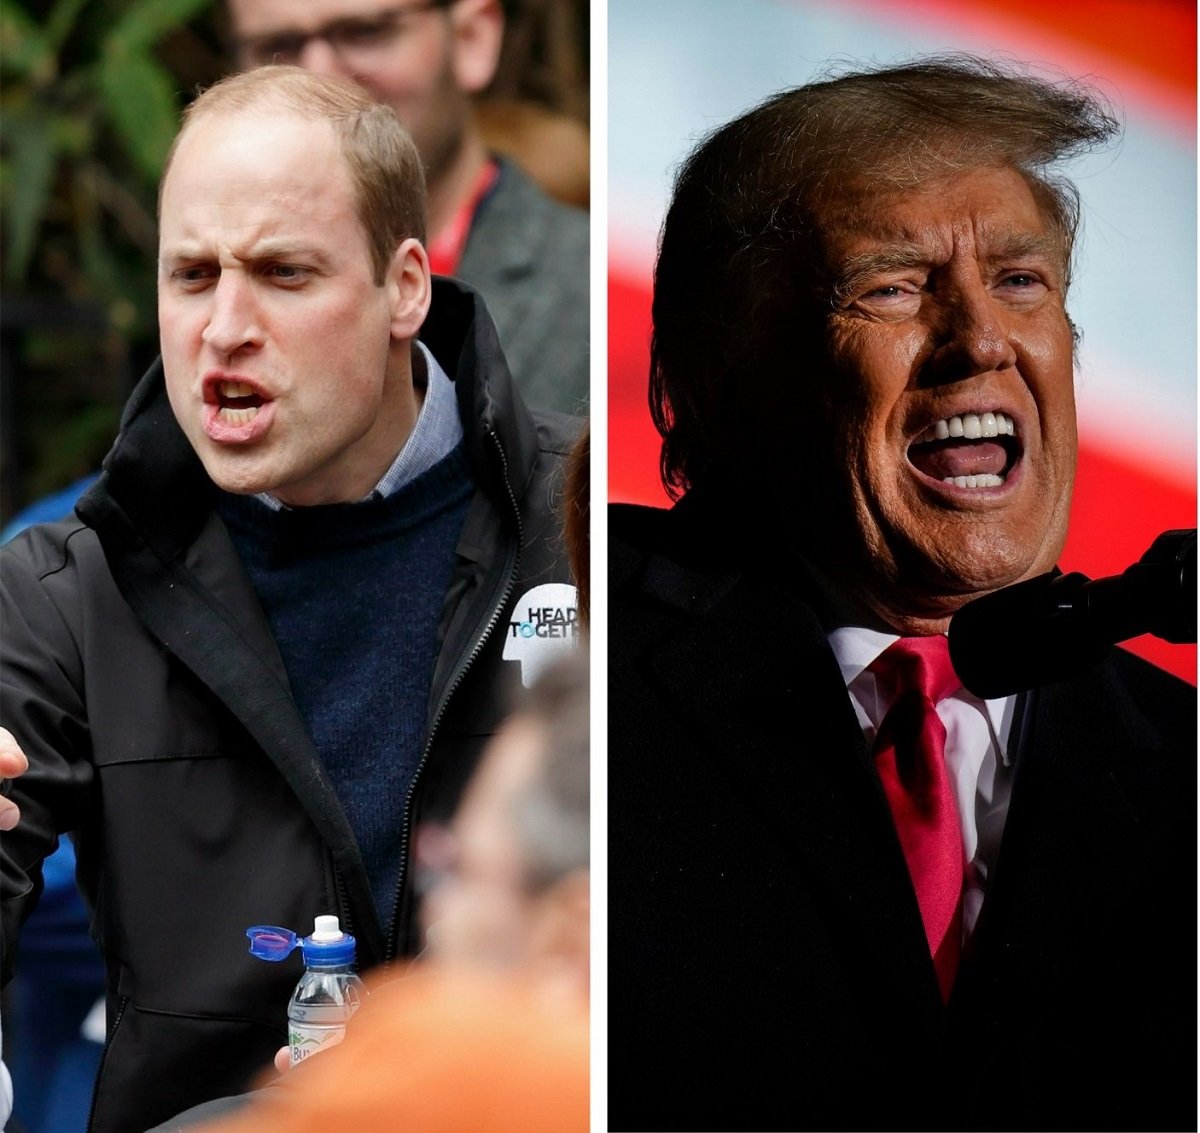 (L): Prince William, who was furious over Donald Trump's comments about Kate Middleton sunbathing topless, at London marathon, (R): Donald Trump speaking at rally